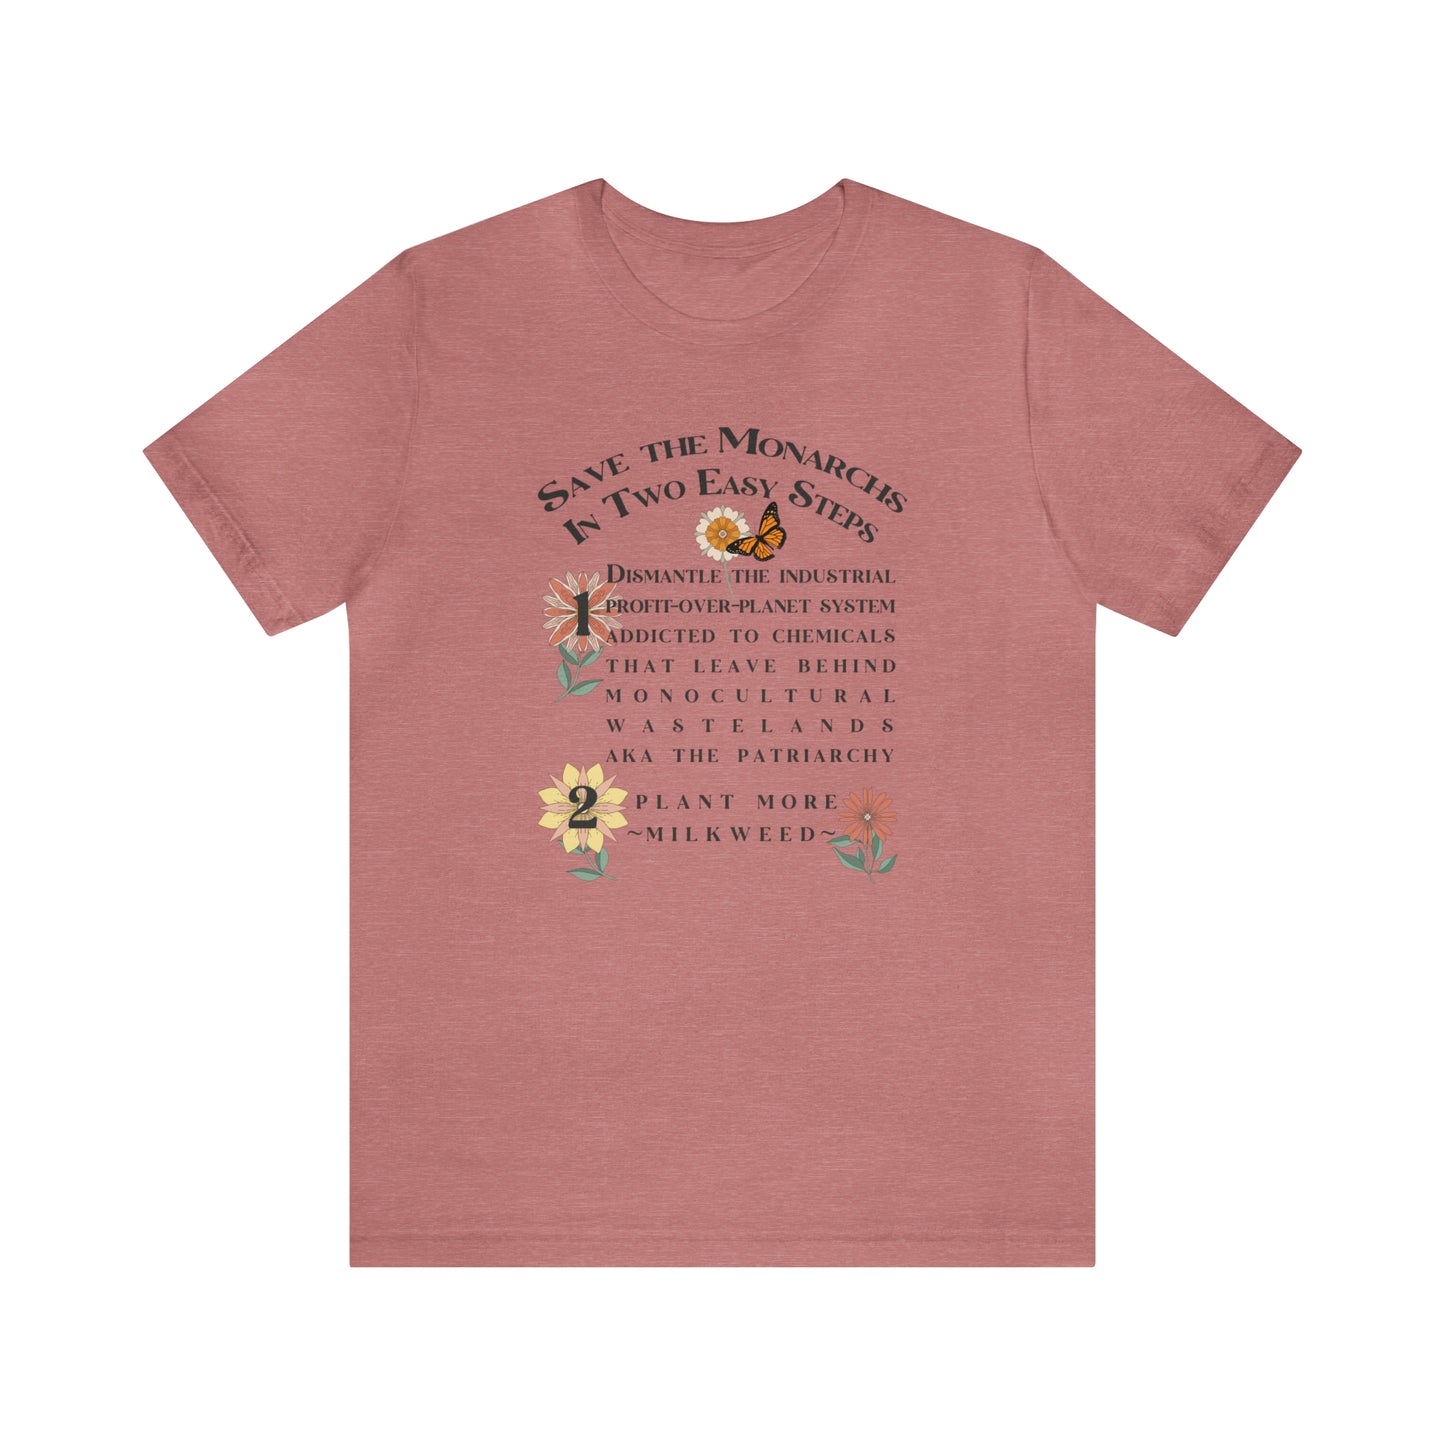 Save Monarchs tee, Nature t-shirt for conservation, Environmental science gift for ecological teachers, gardeners, In 2 Easy Steps!